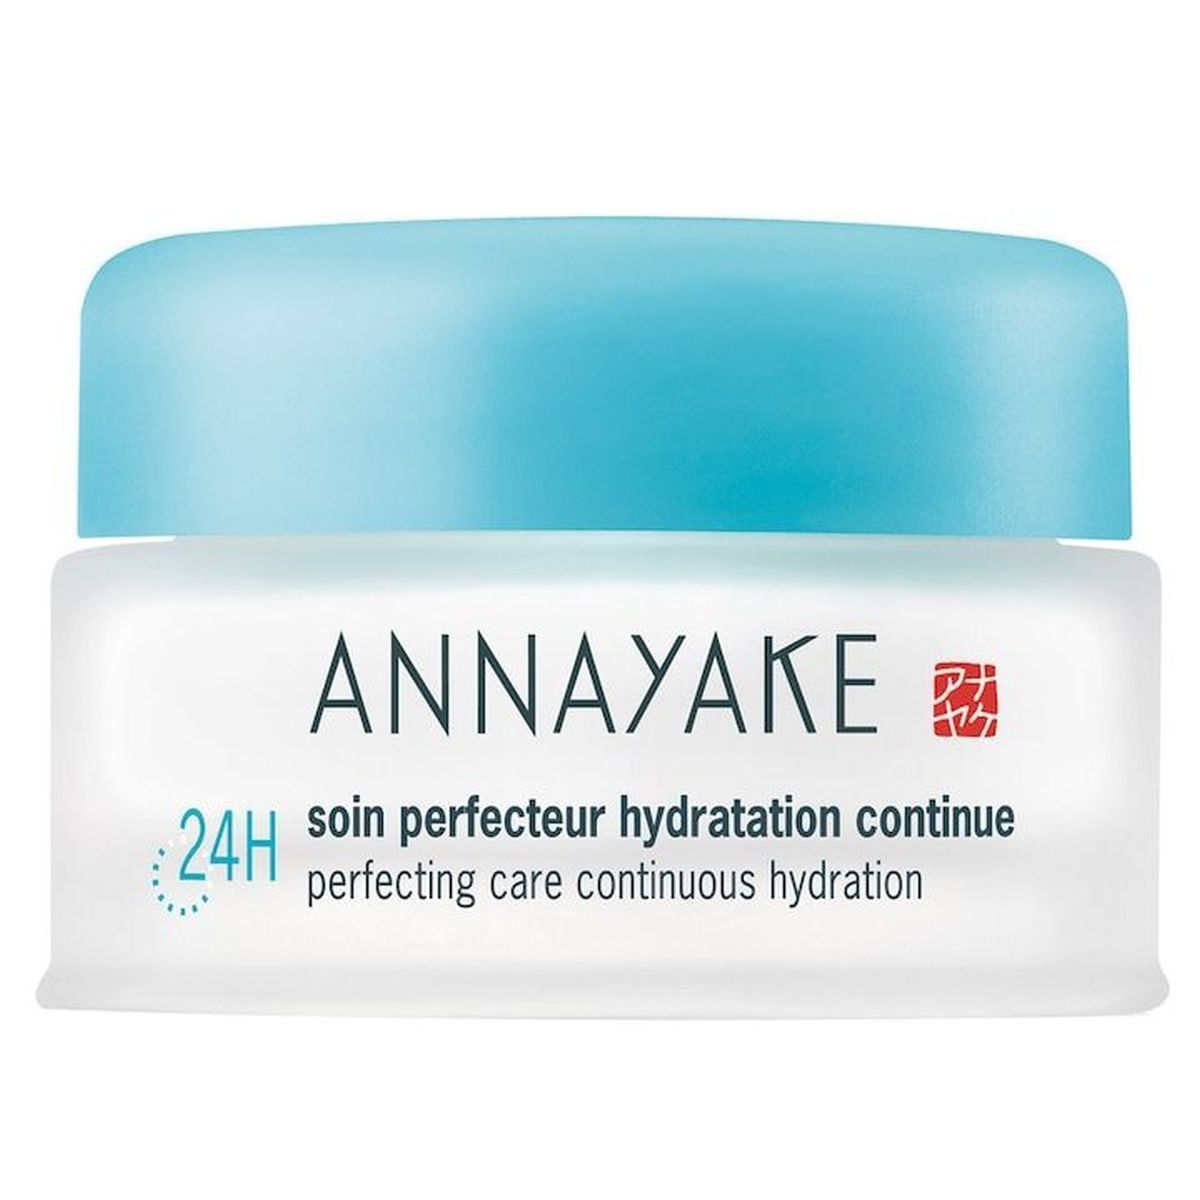 Image of 24h Soin Perfecteur Hydratation Continue Annayake 50ml